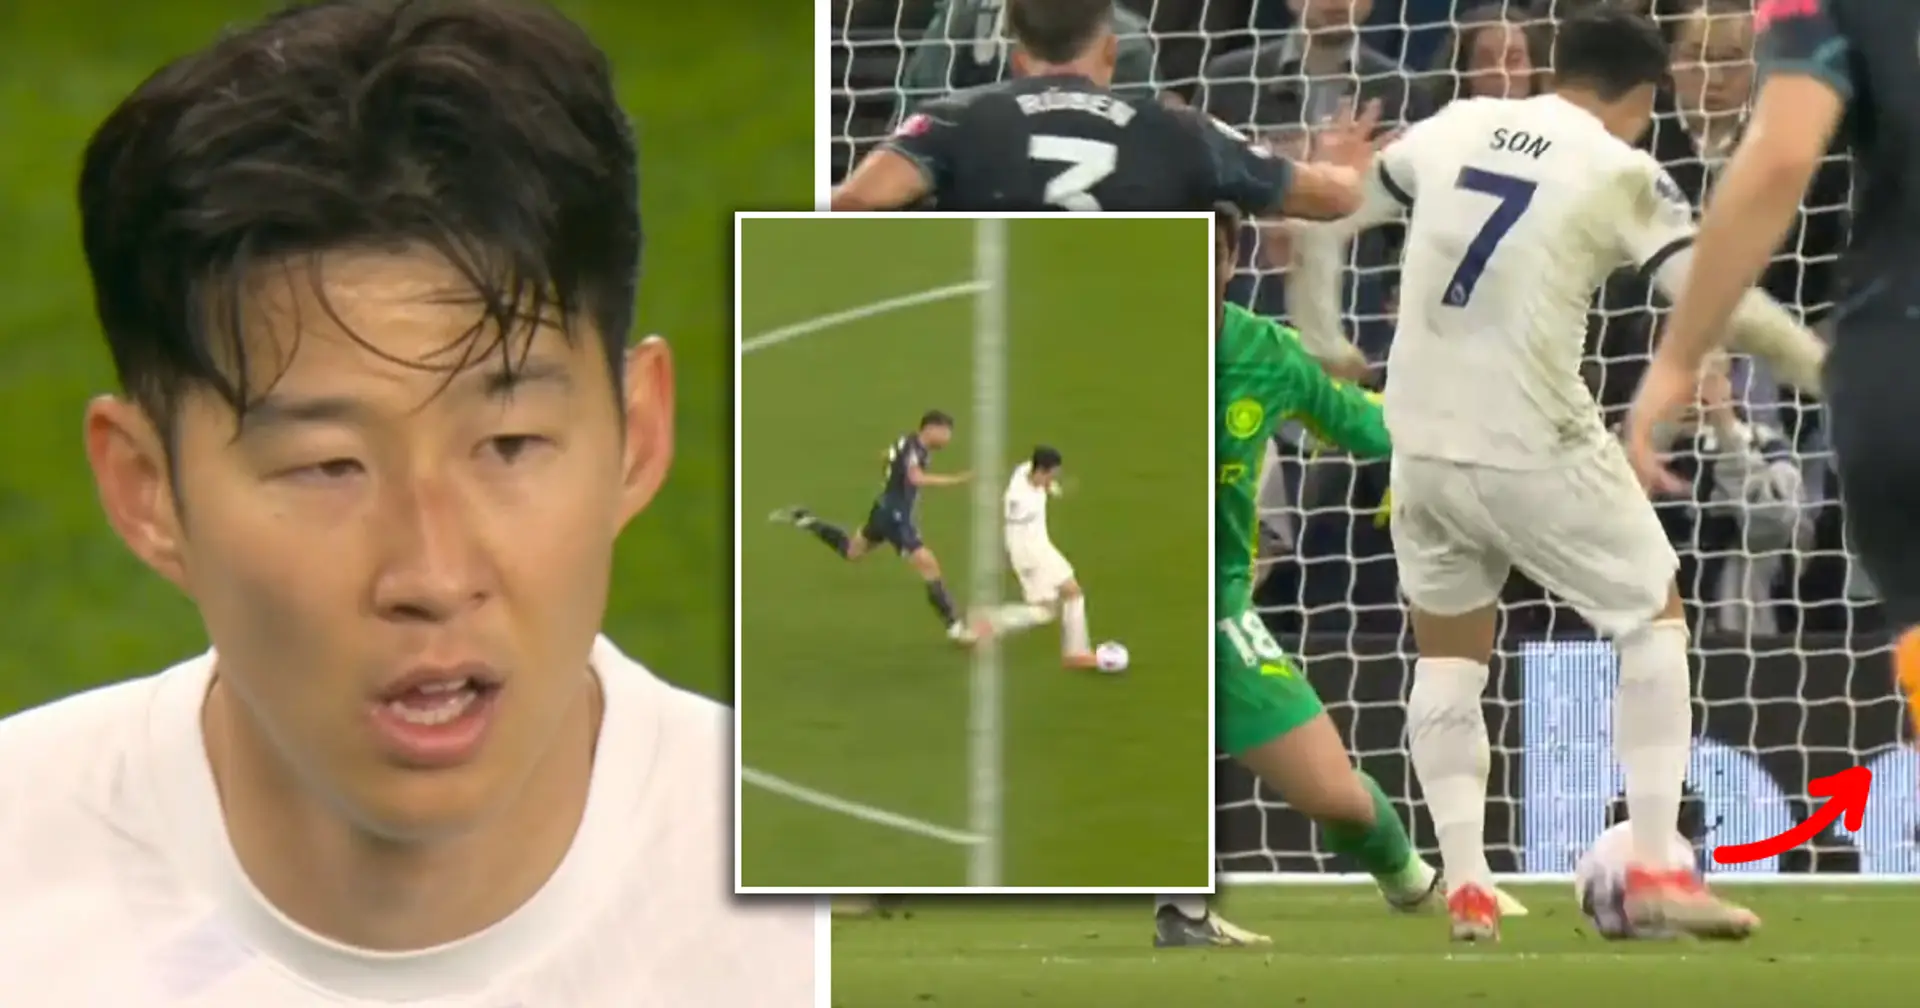 'Son has never missed that in his life': Football fans make  a 'fixed' match claim after Son miss